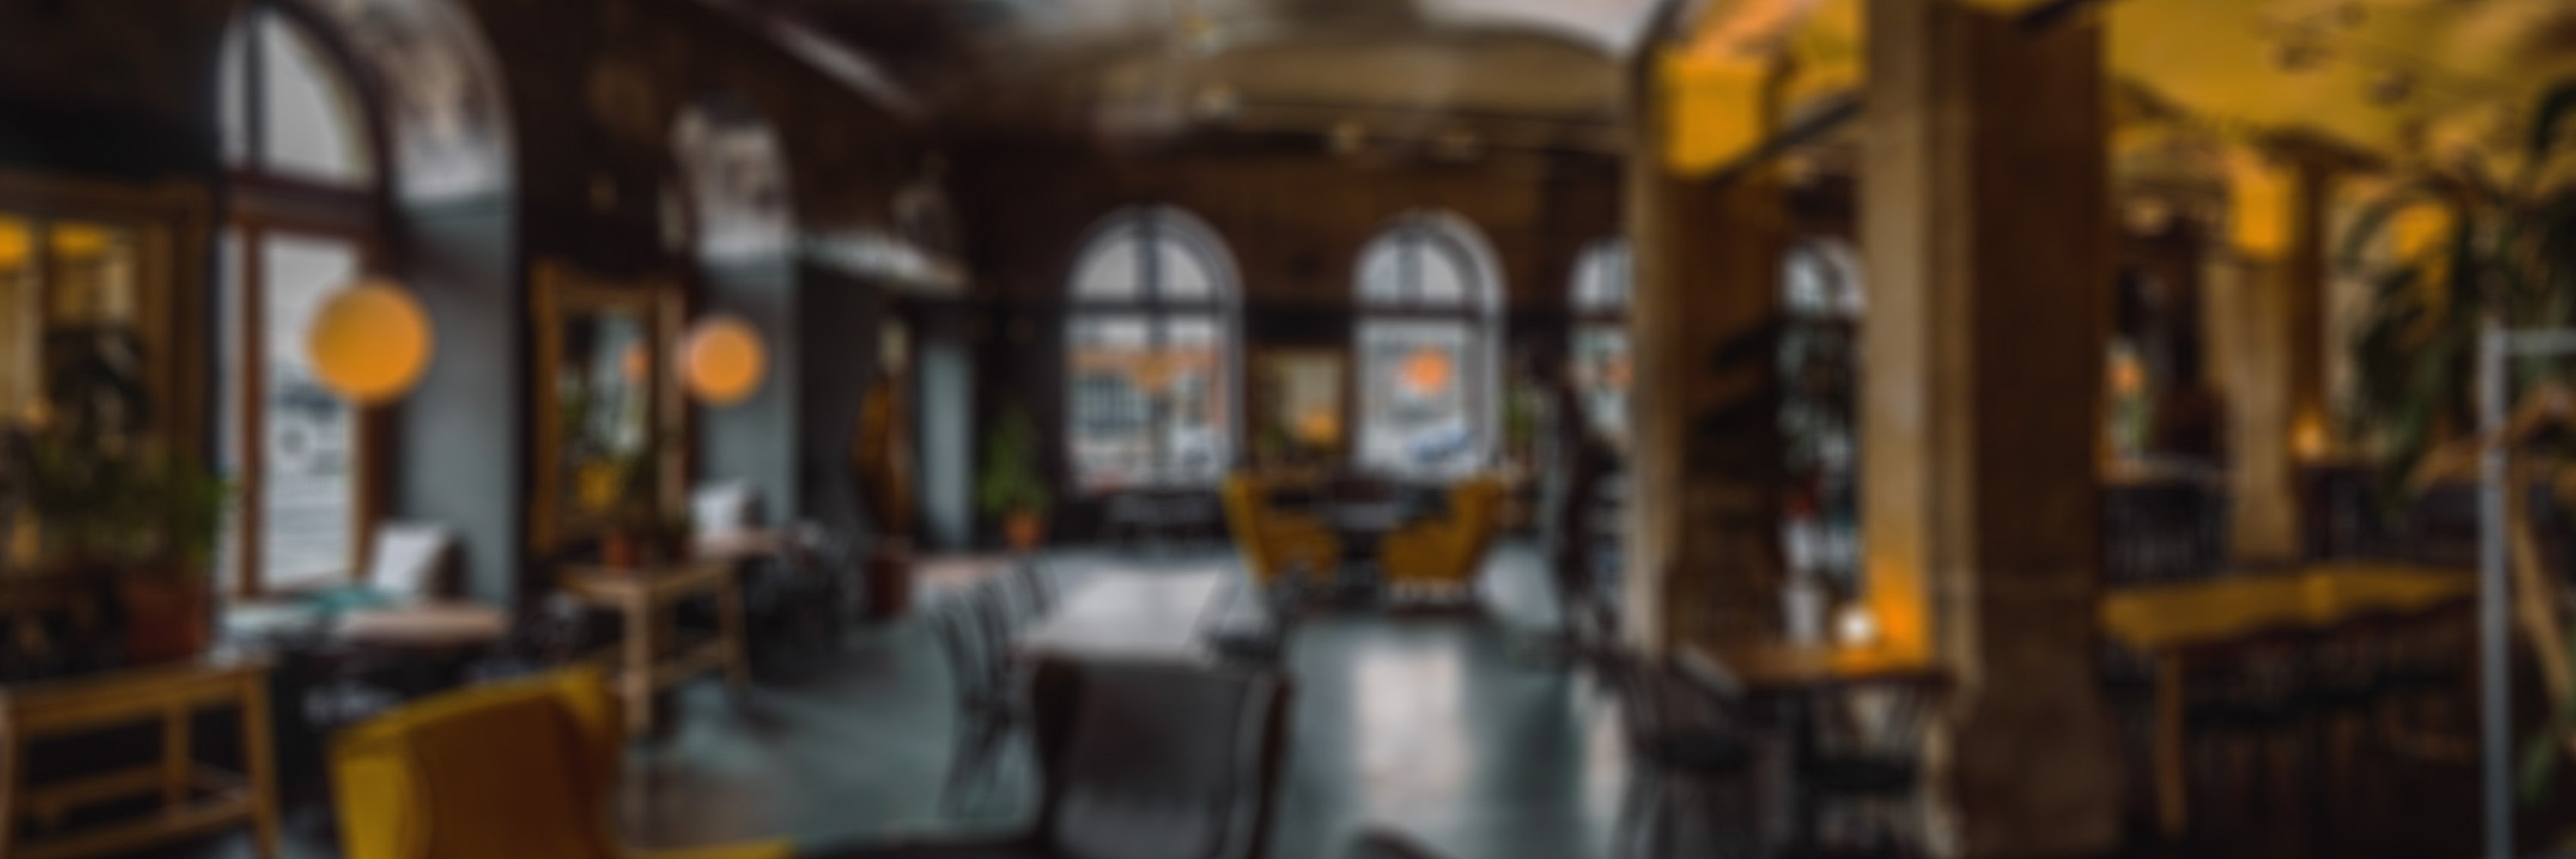 Wide out of focus image of a coffee shop lobby.